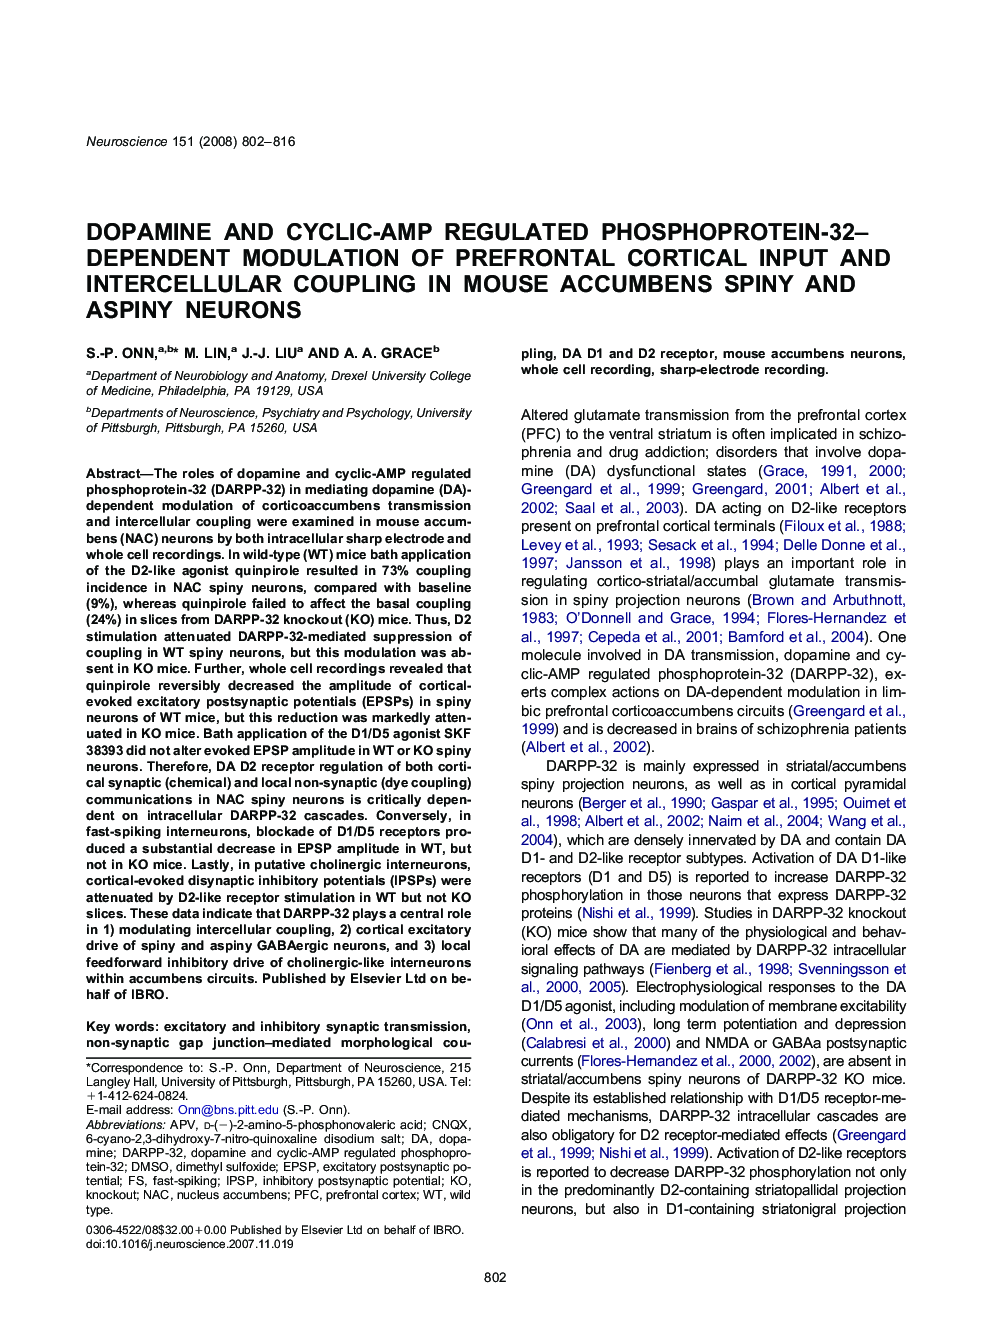 Dopamine and cyclic-AMP regulated phosphoprotein-32-dependent modulation of prefrontal cortical input and intercellular coupling in mouse accumbens spiny and aspiny neurons